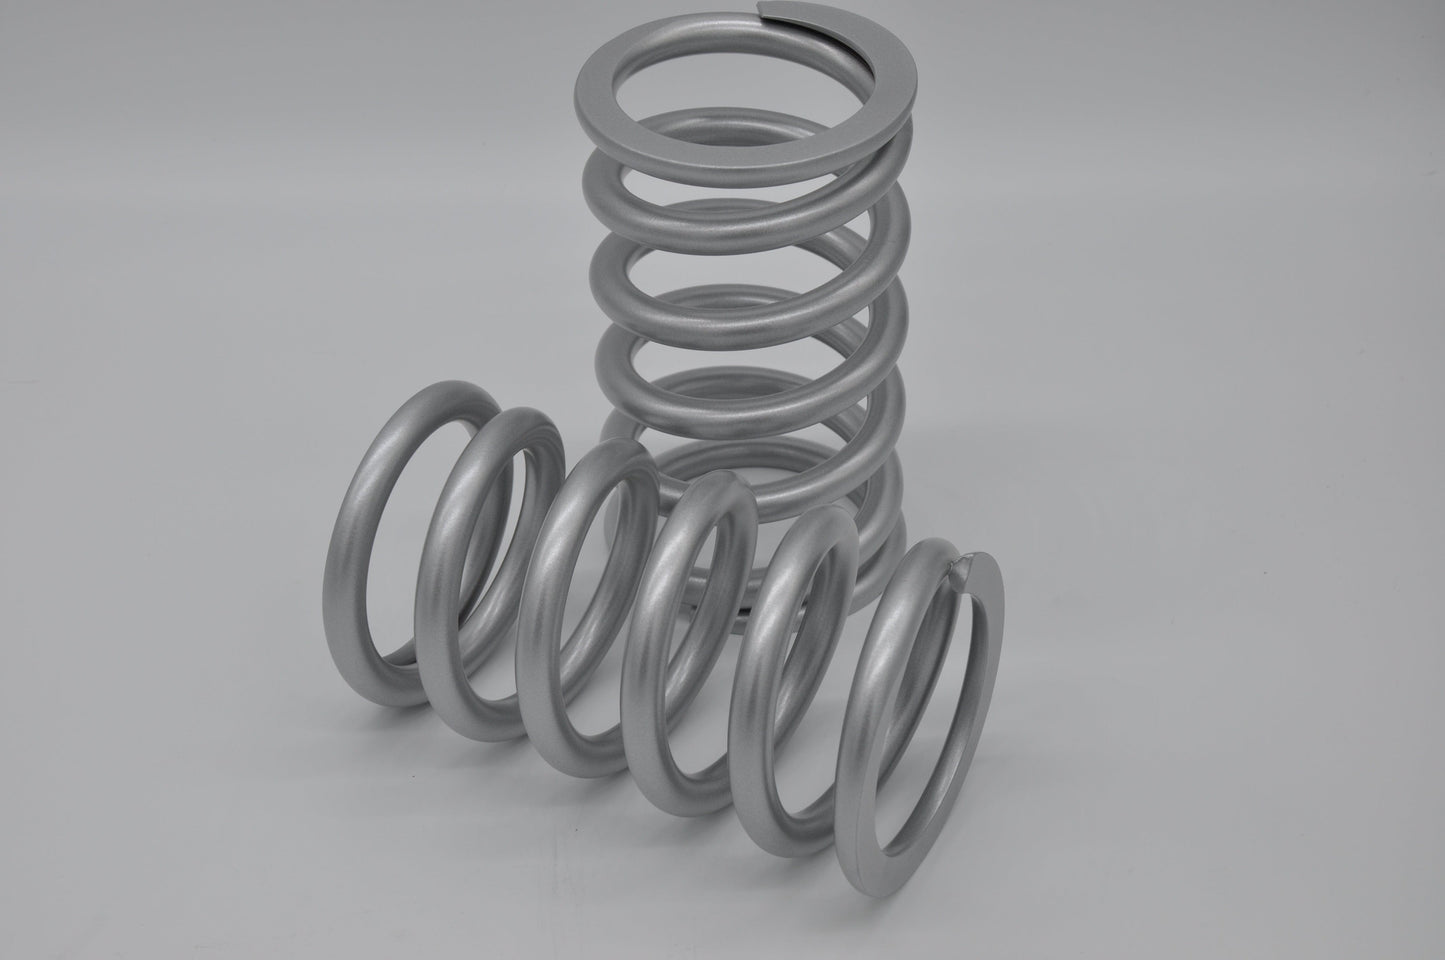 Two Silver Rebound Tender Springs for CFMOTO Z-Force